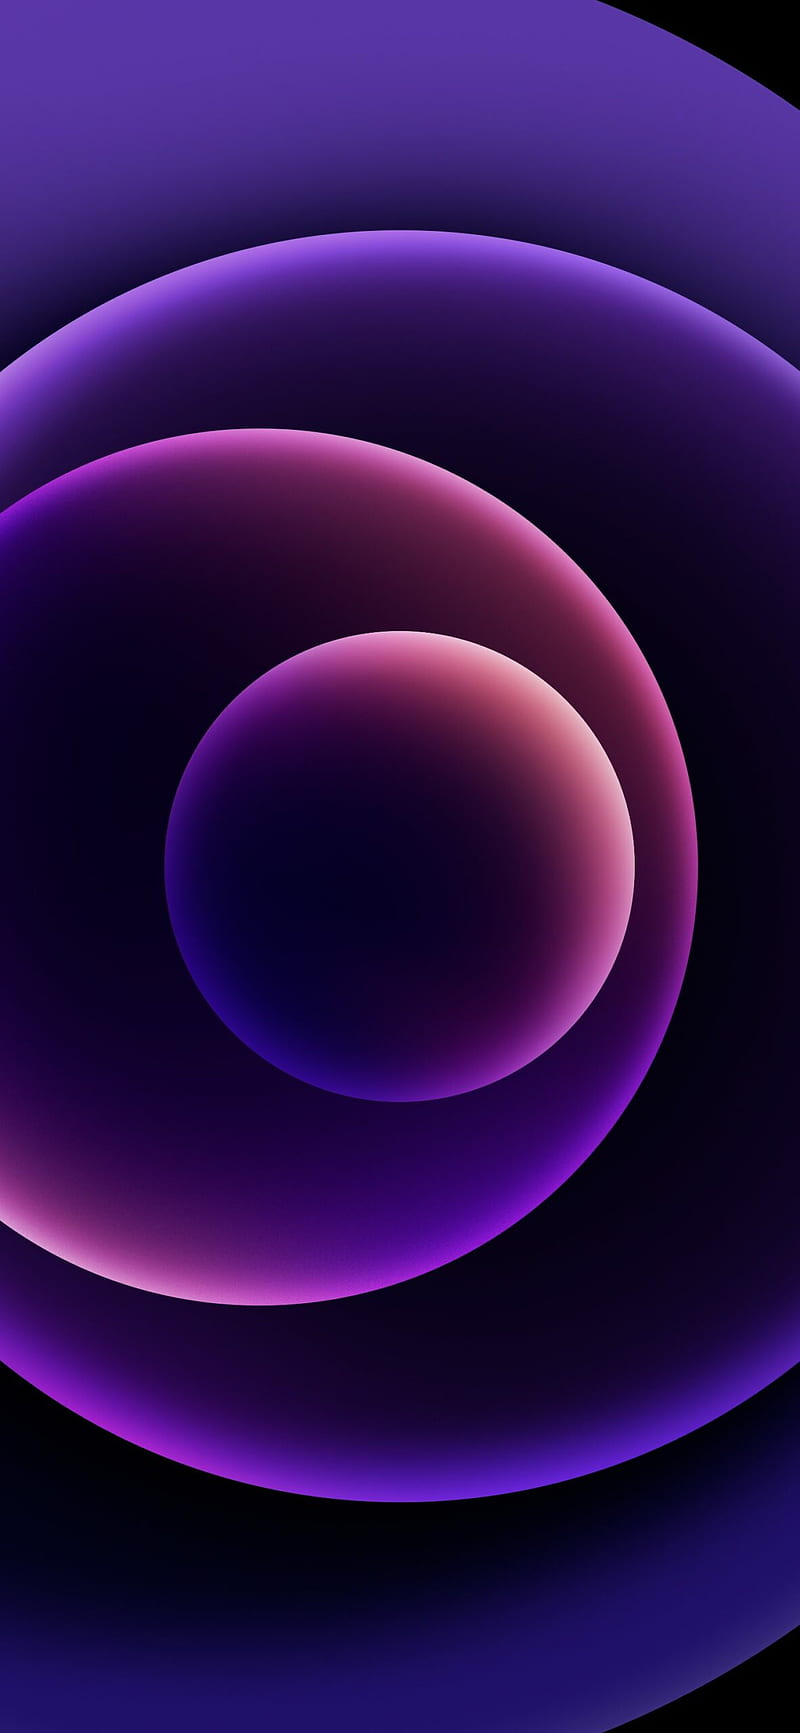 Apple iOS 14.5 RC adds a new purple live ( link inside), Purple and Teal, HD phone wallpaper